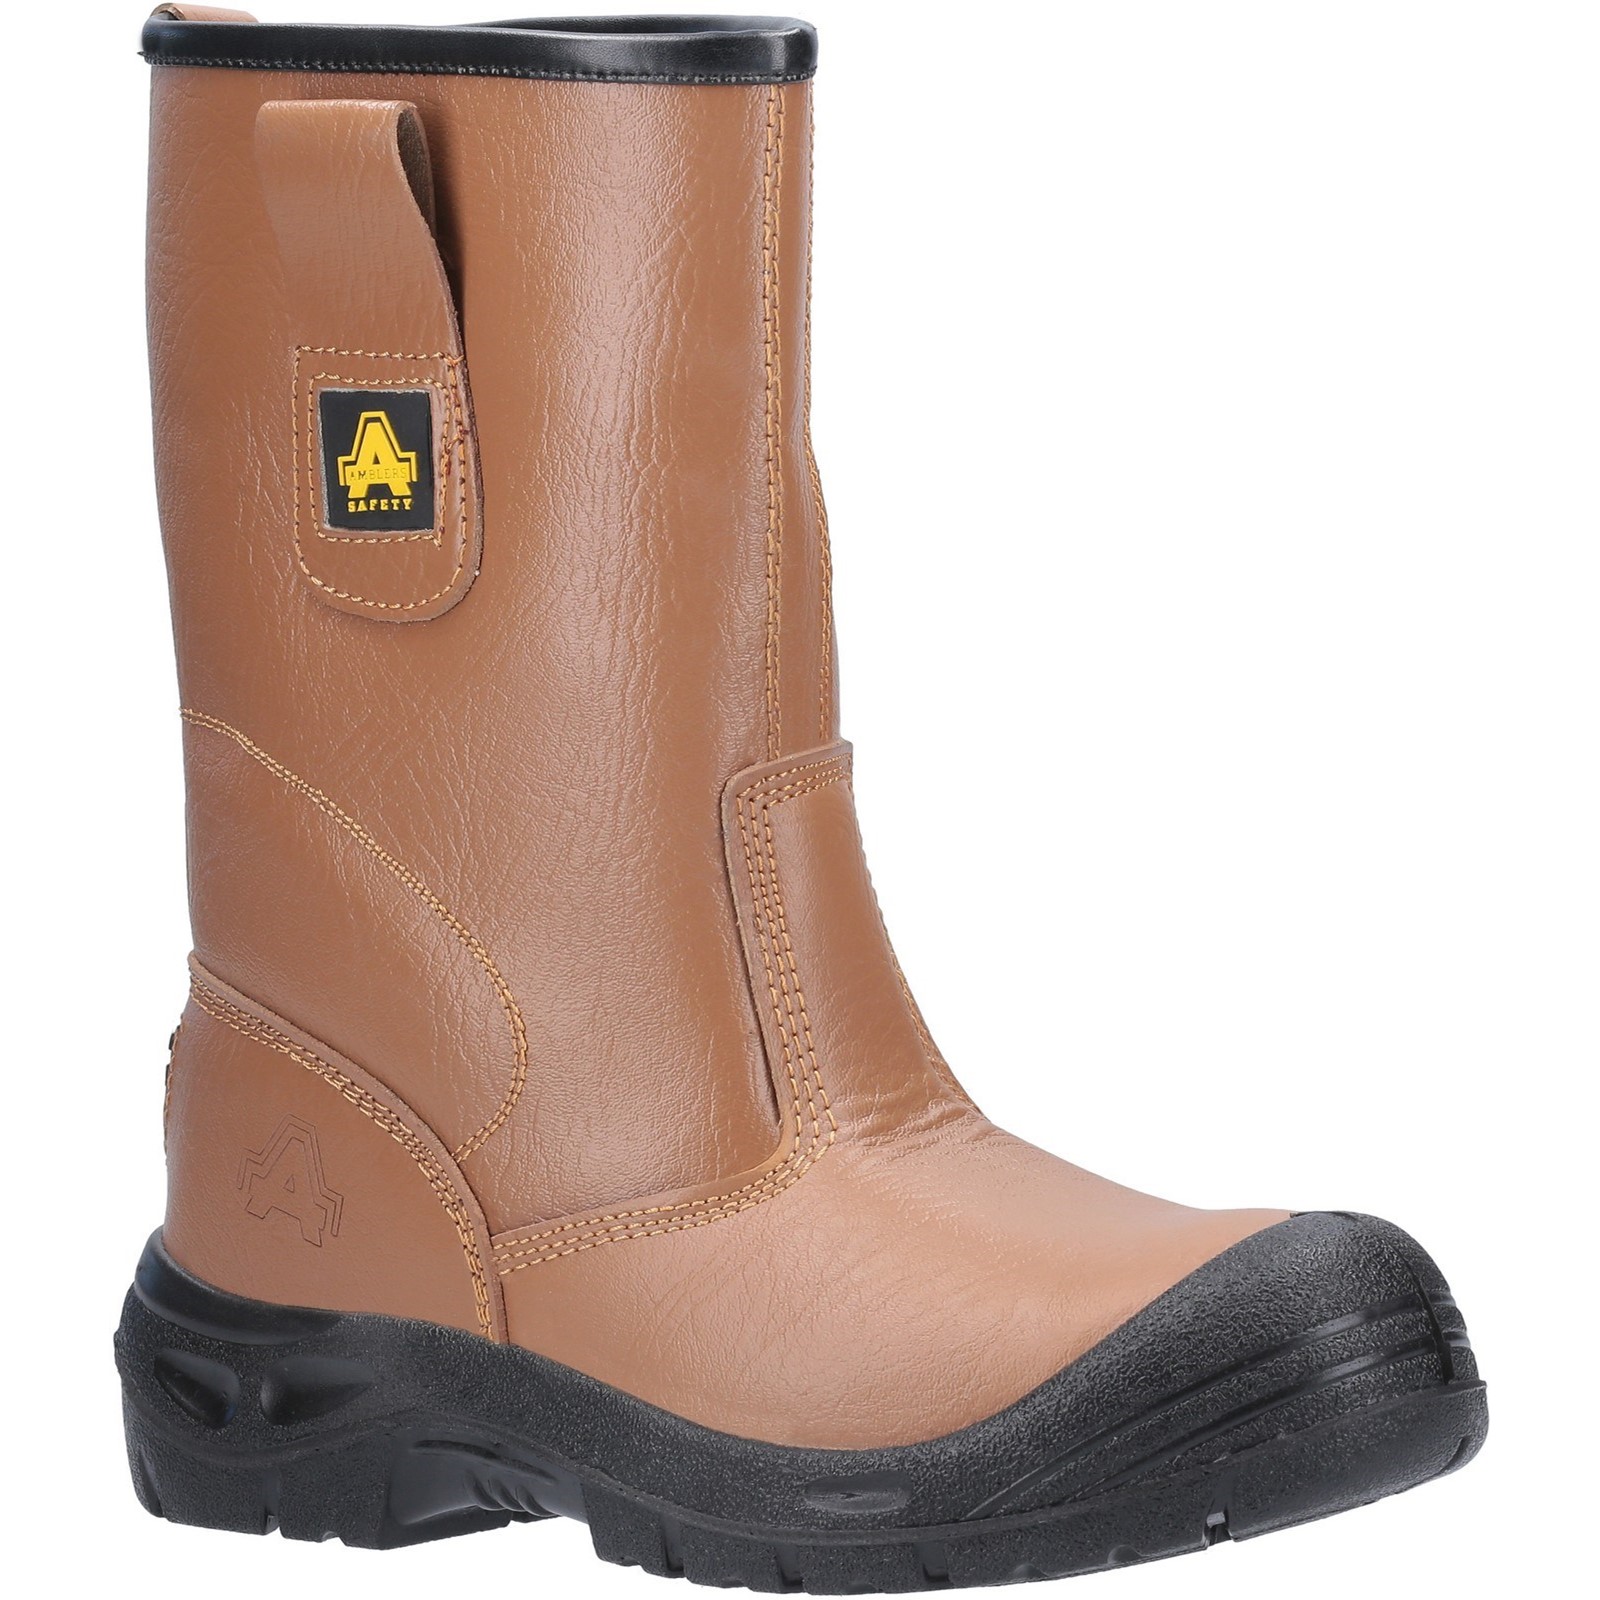 FS142 Water Resistant Pull On Safety Rigger Boot